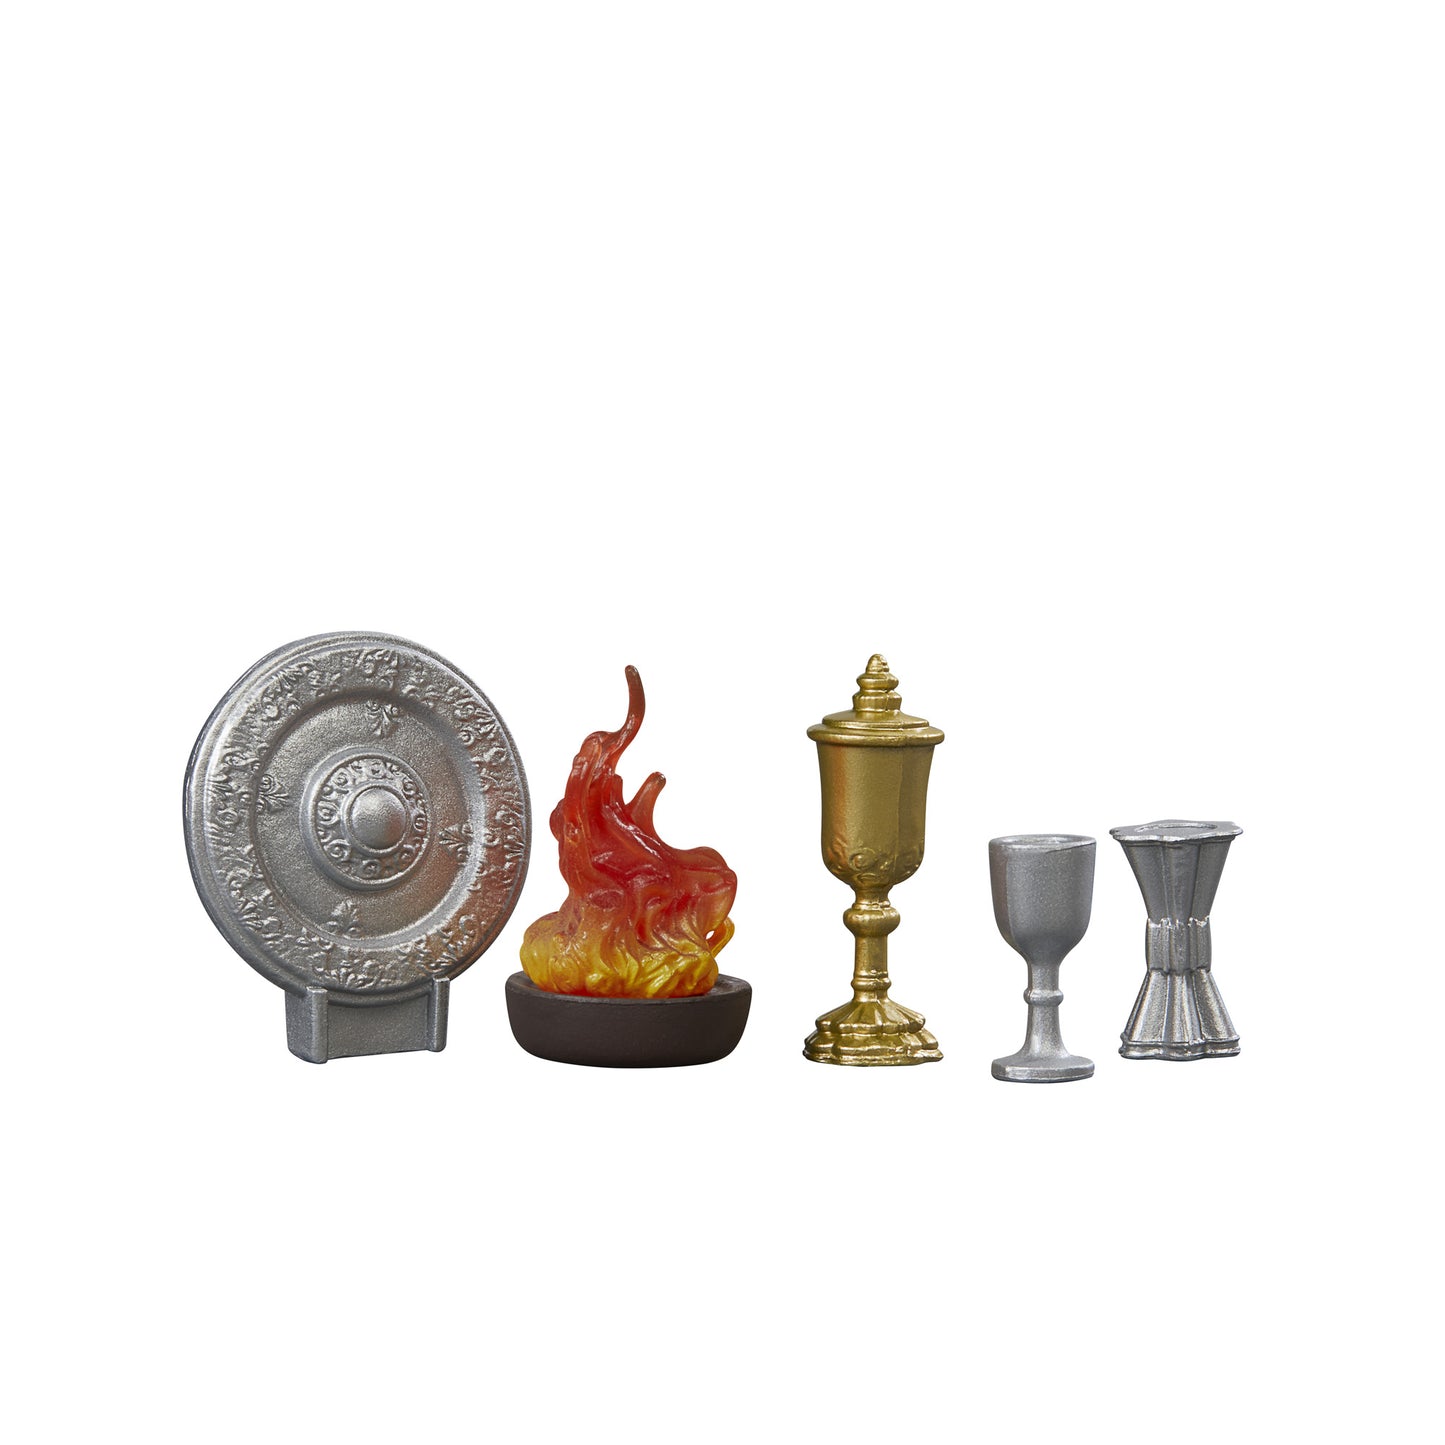 Indiana Jones Adventure Series Grail Knight Action Figure Toy Accessories - Heretoserveyou